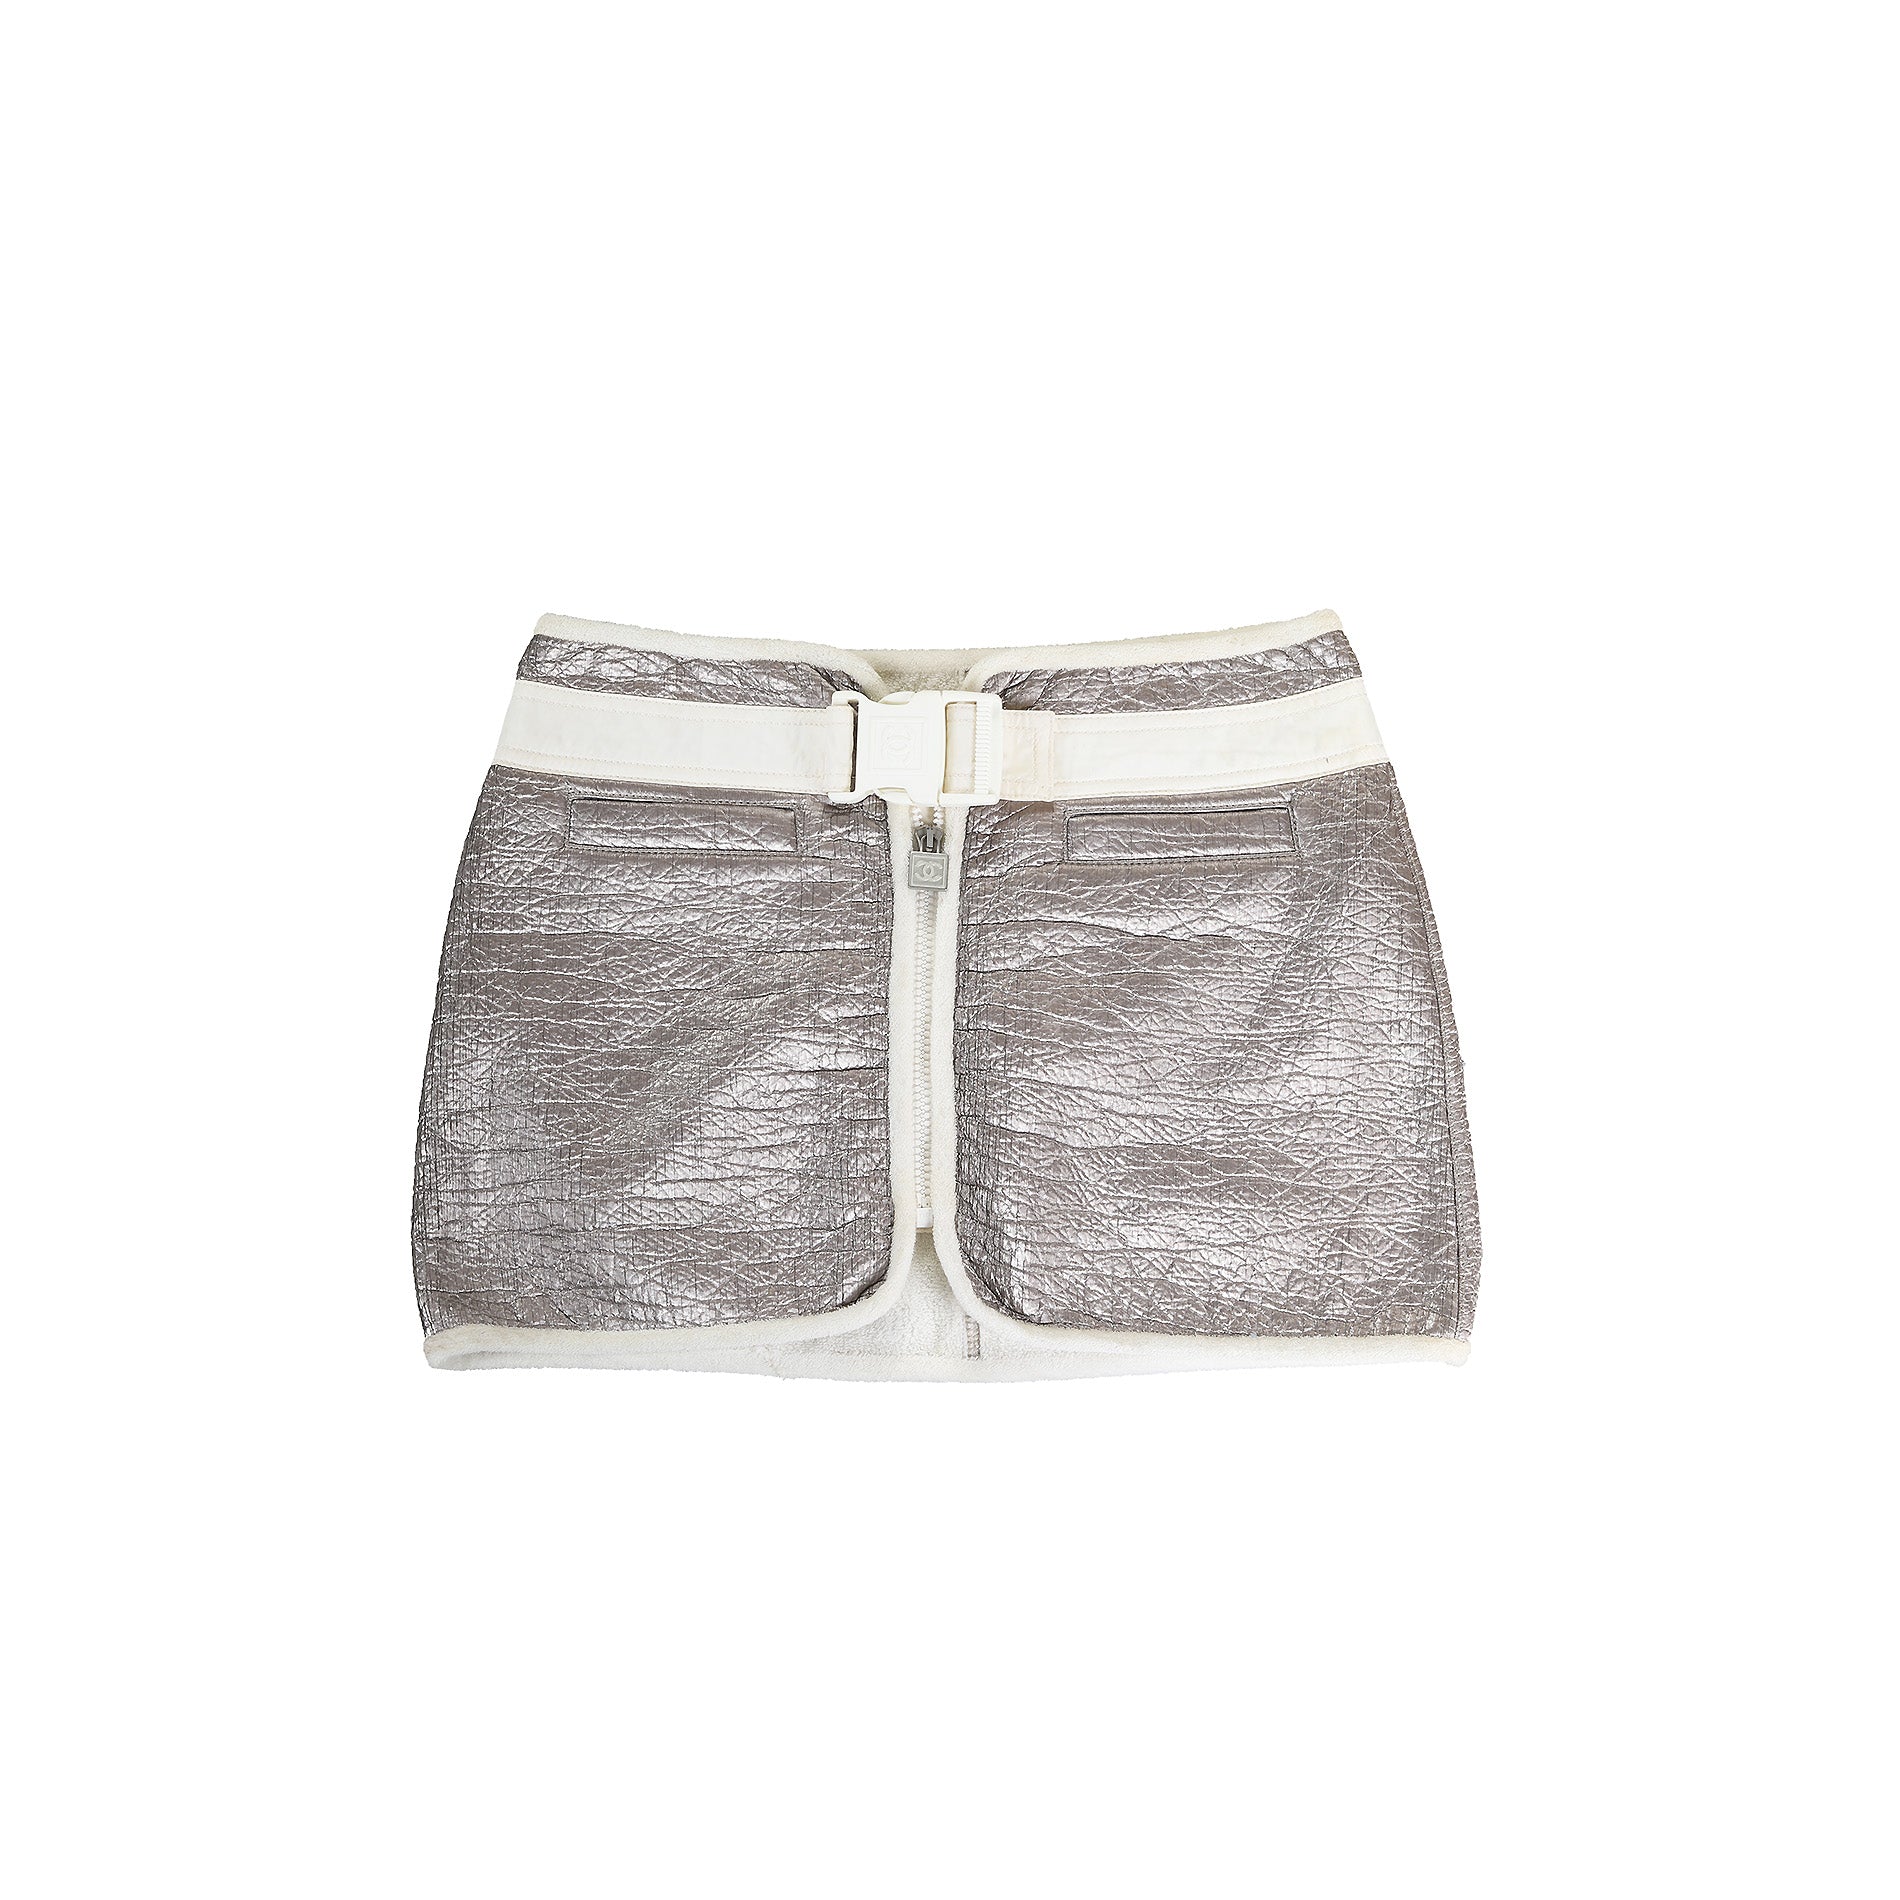 Chanel Sport 2000s Silver Buckled Skirt